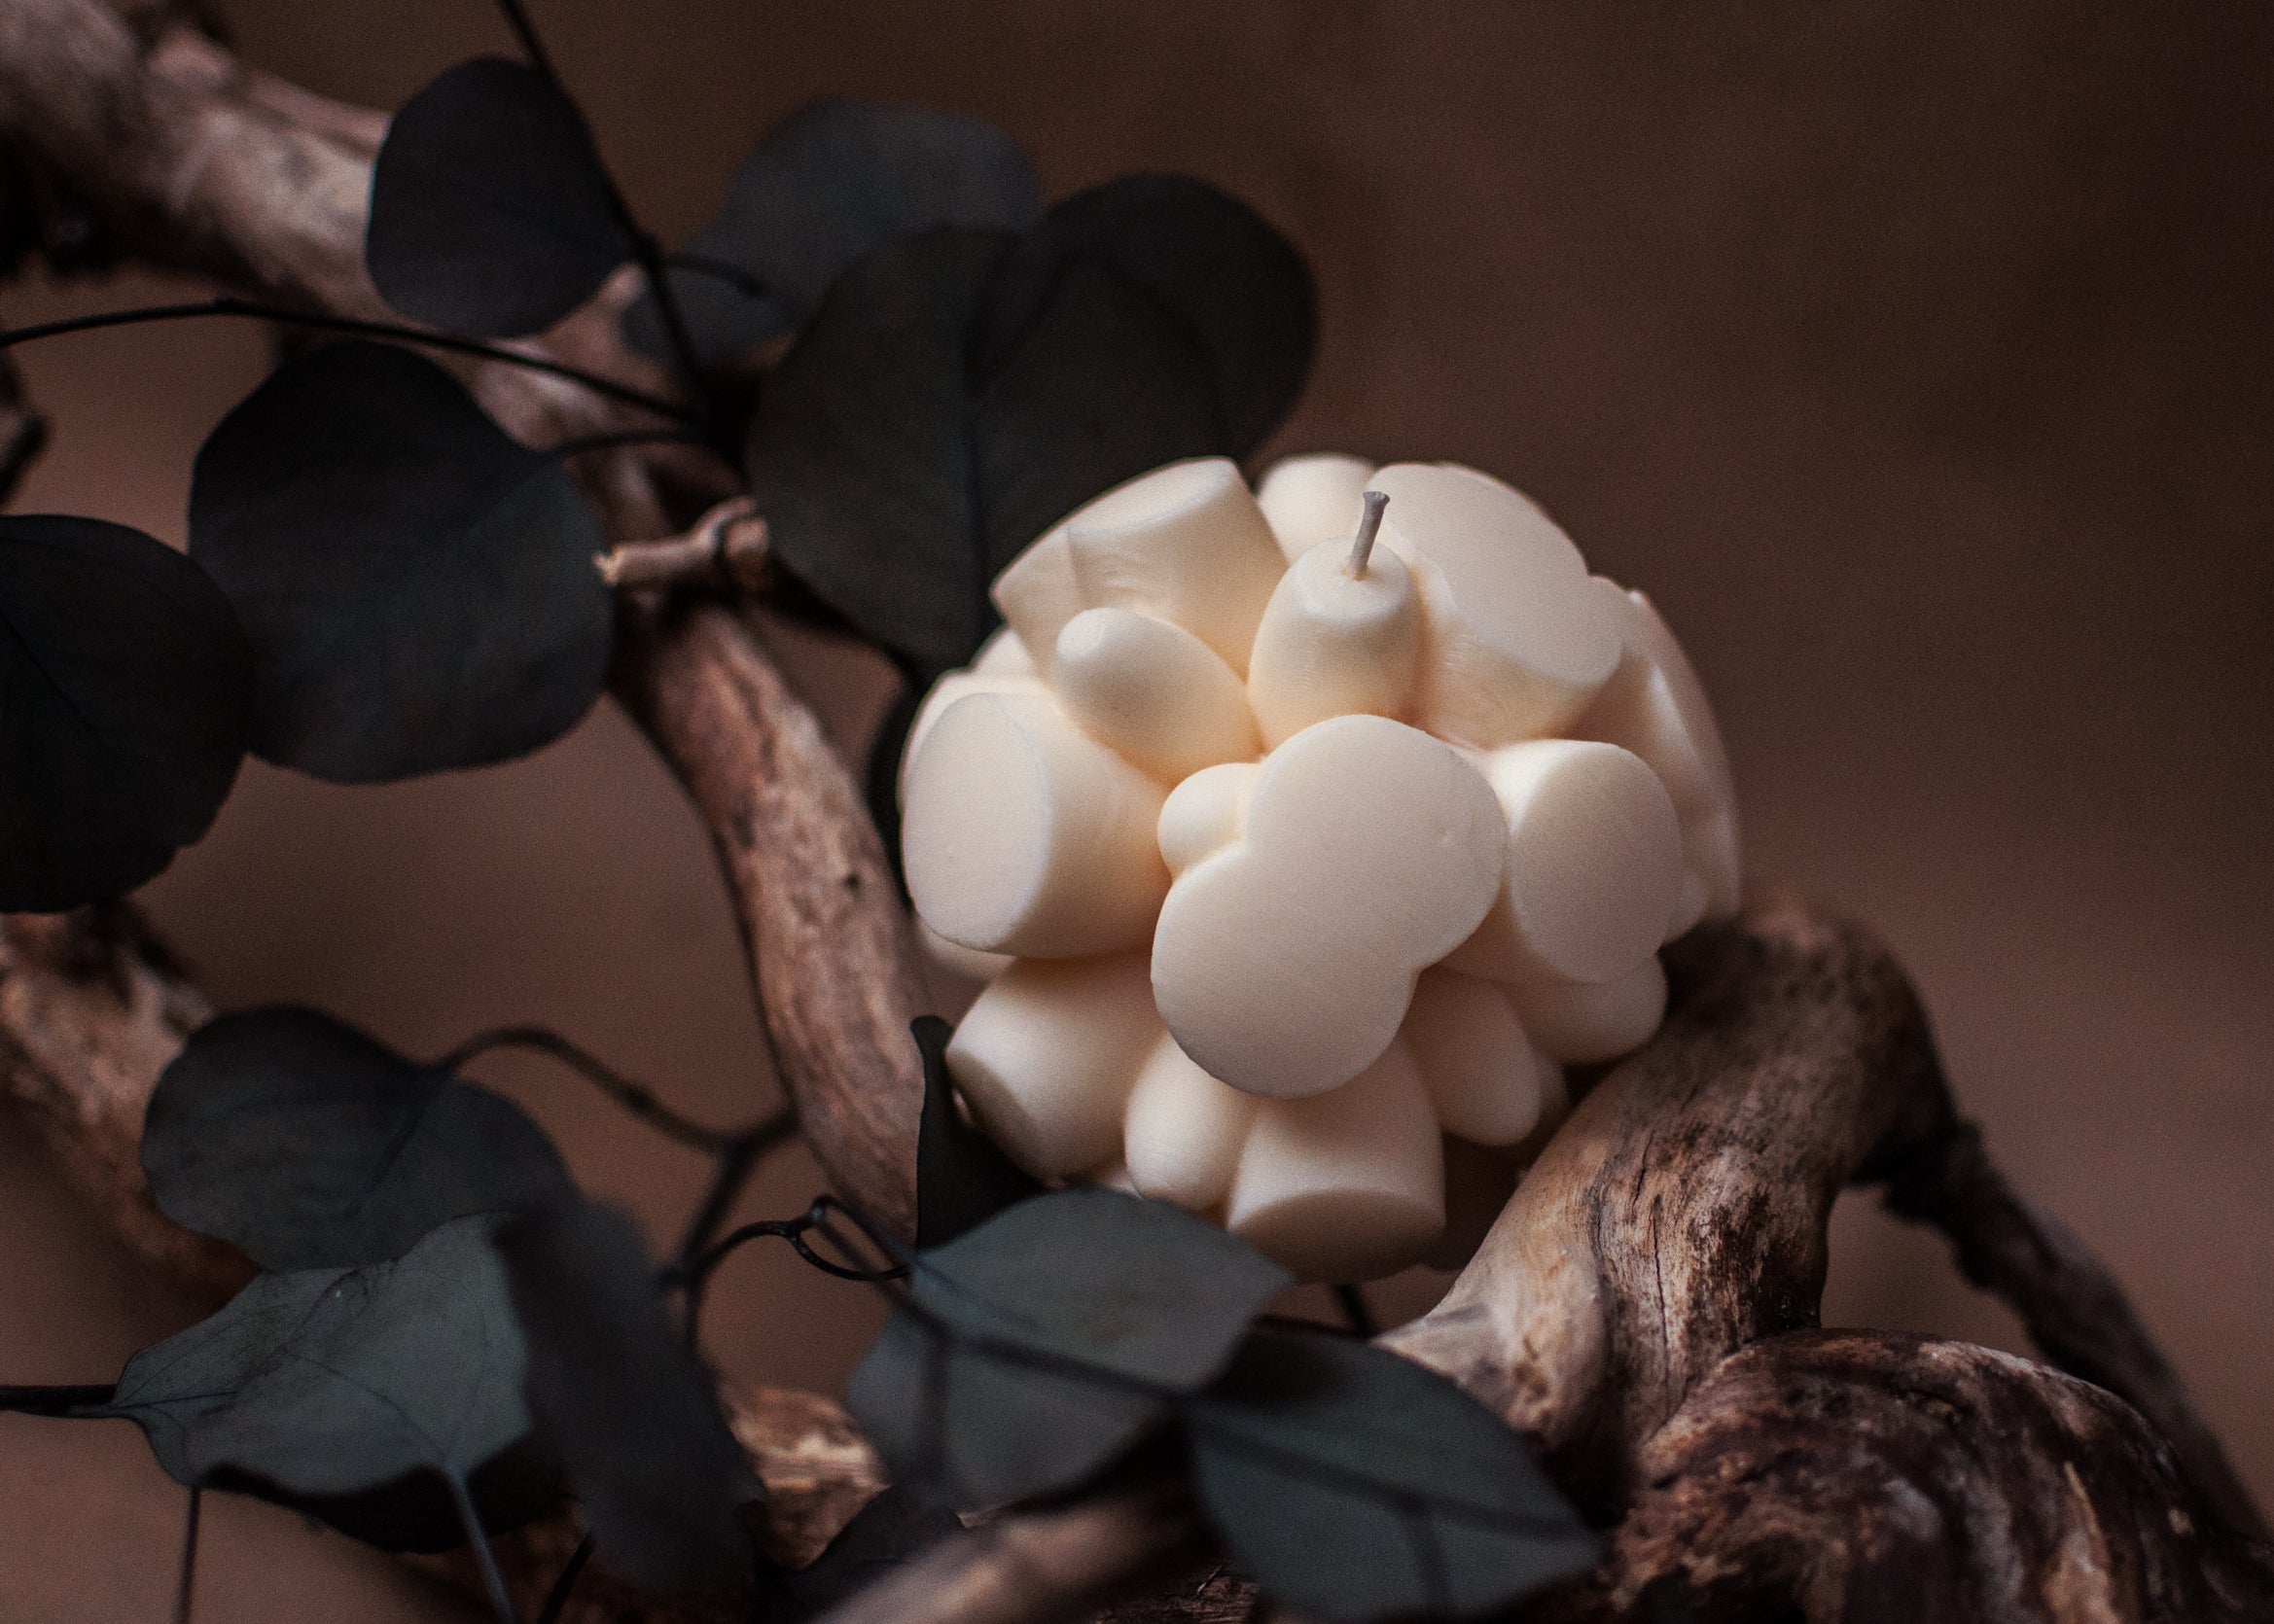 ANTHIS - Sculptural Candle